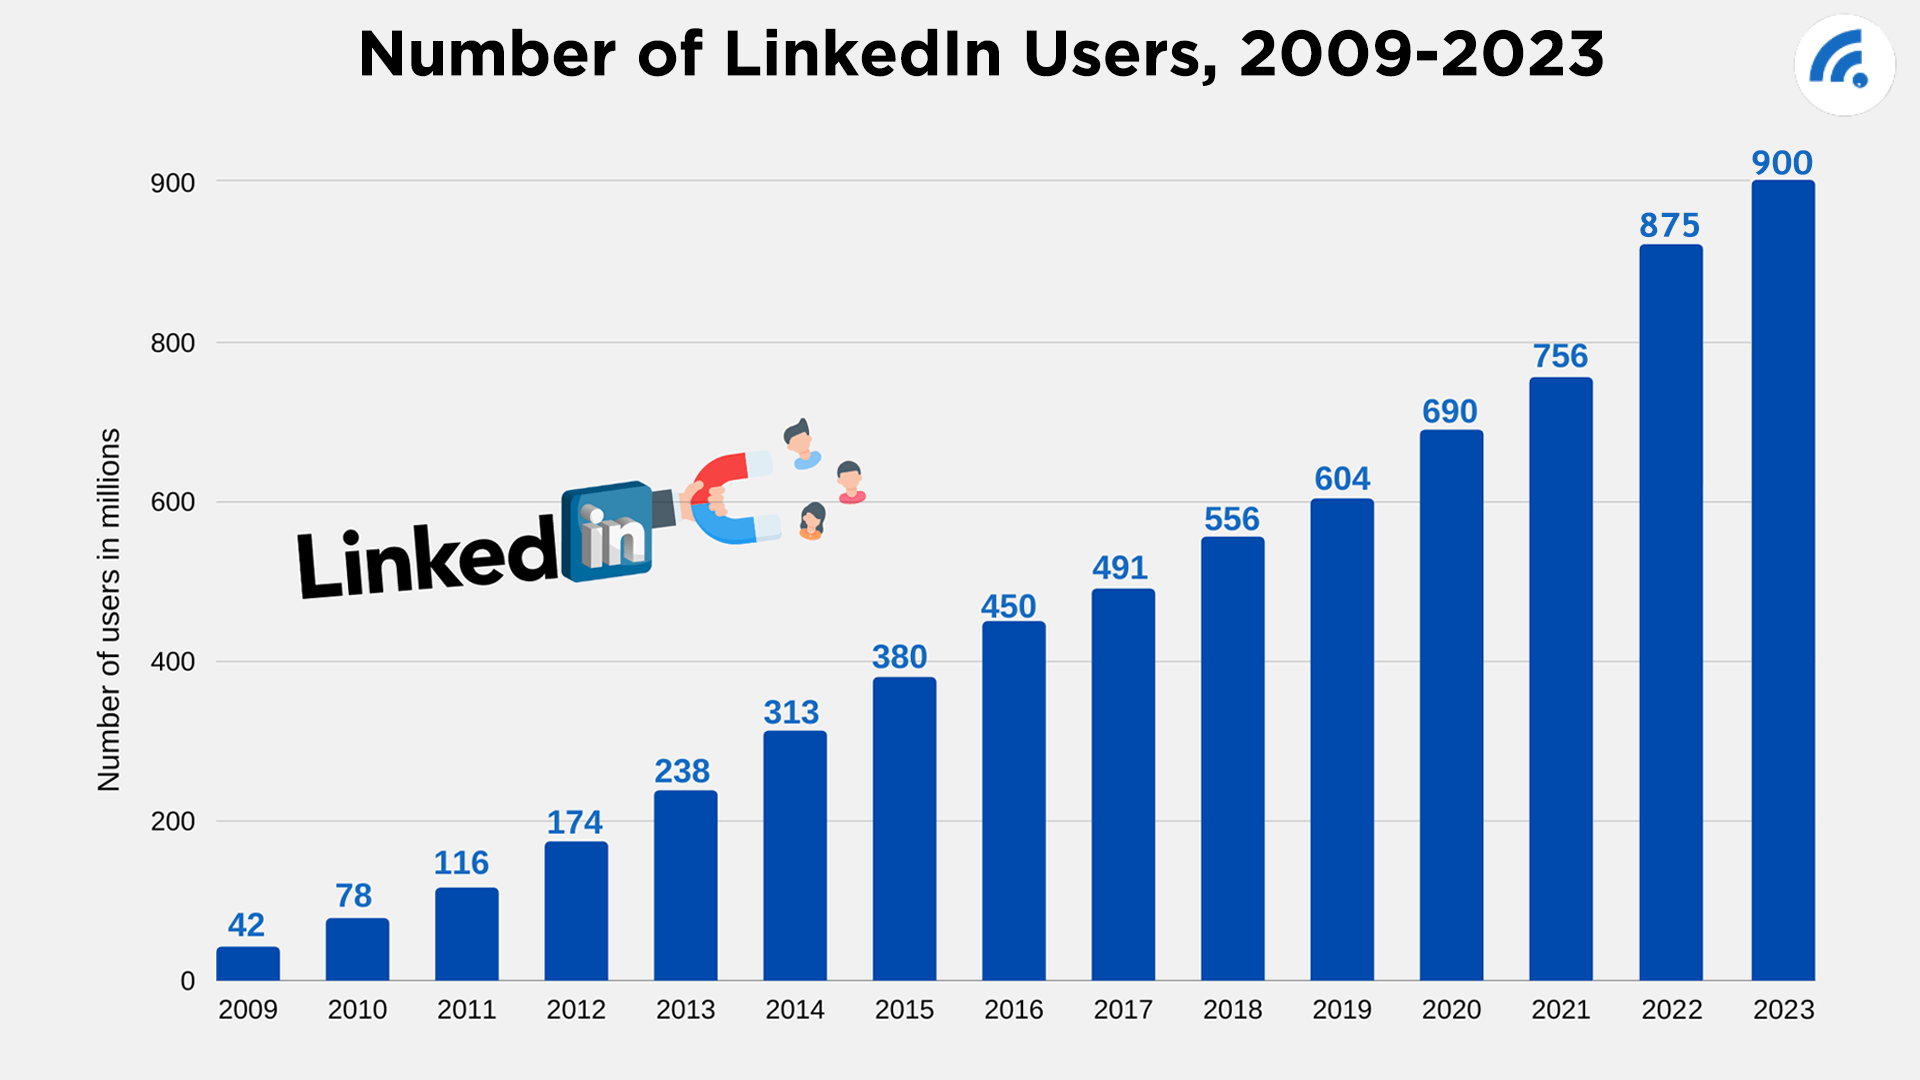 Number of LinkedIn Users 2023